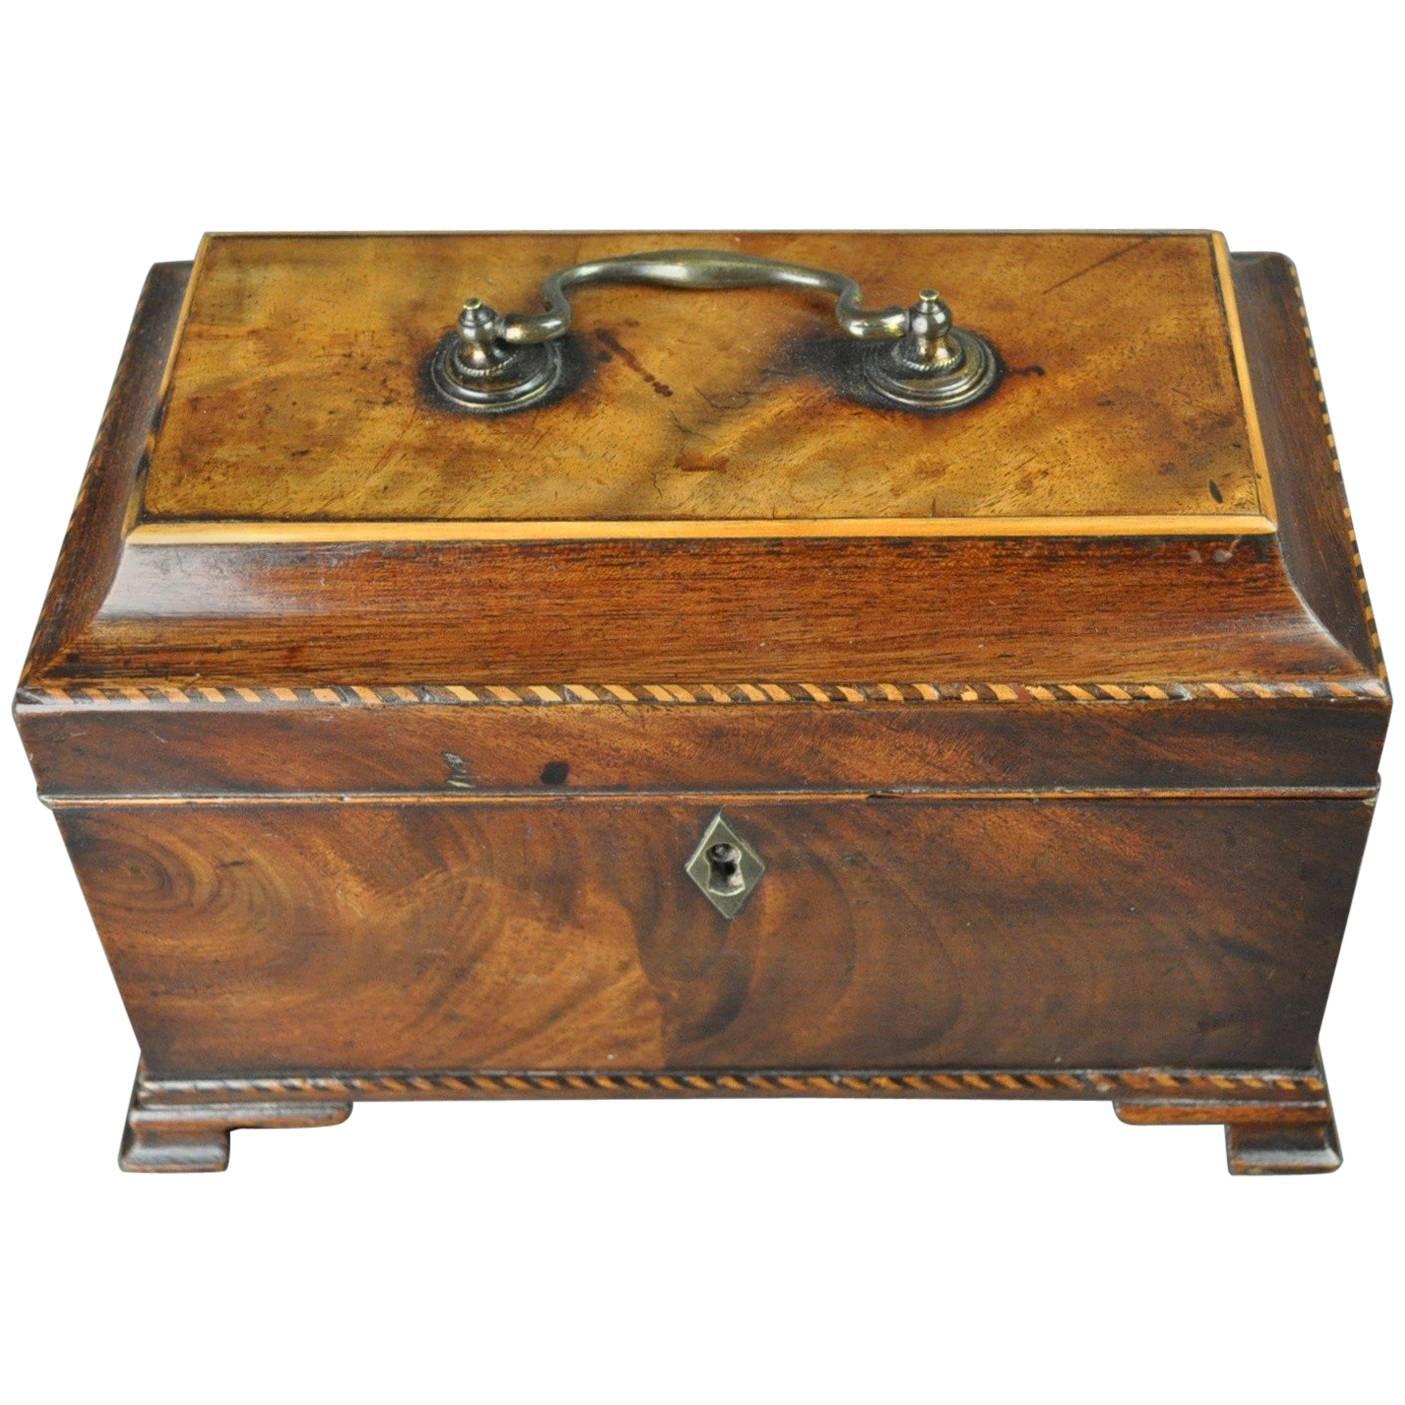 Chippendale Period Three Compartment Tea Caddy For Sale